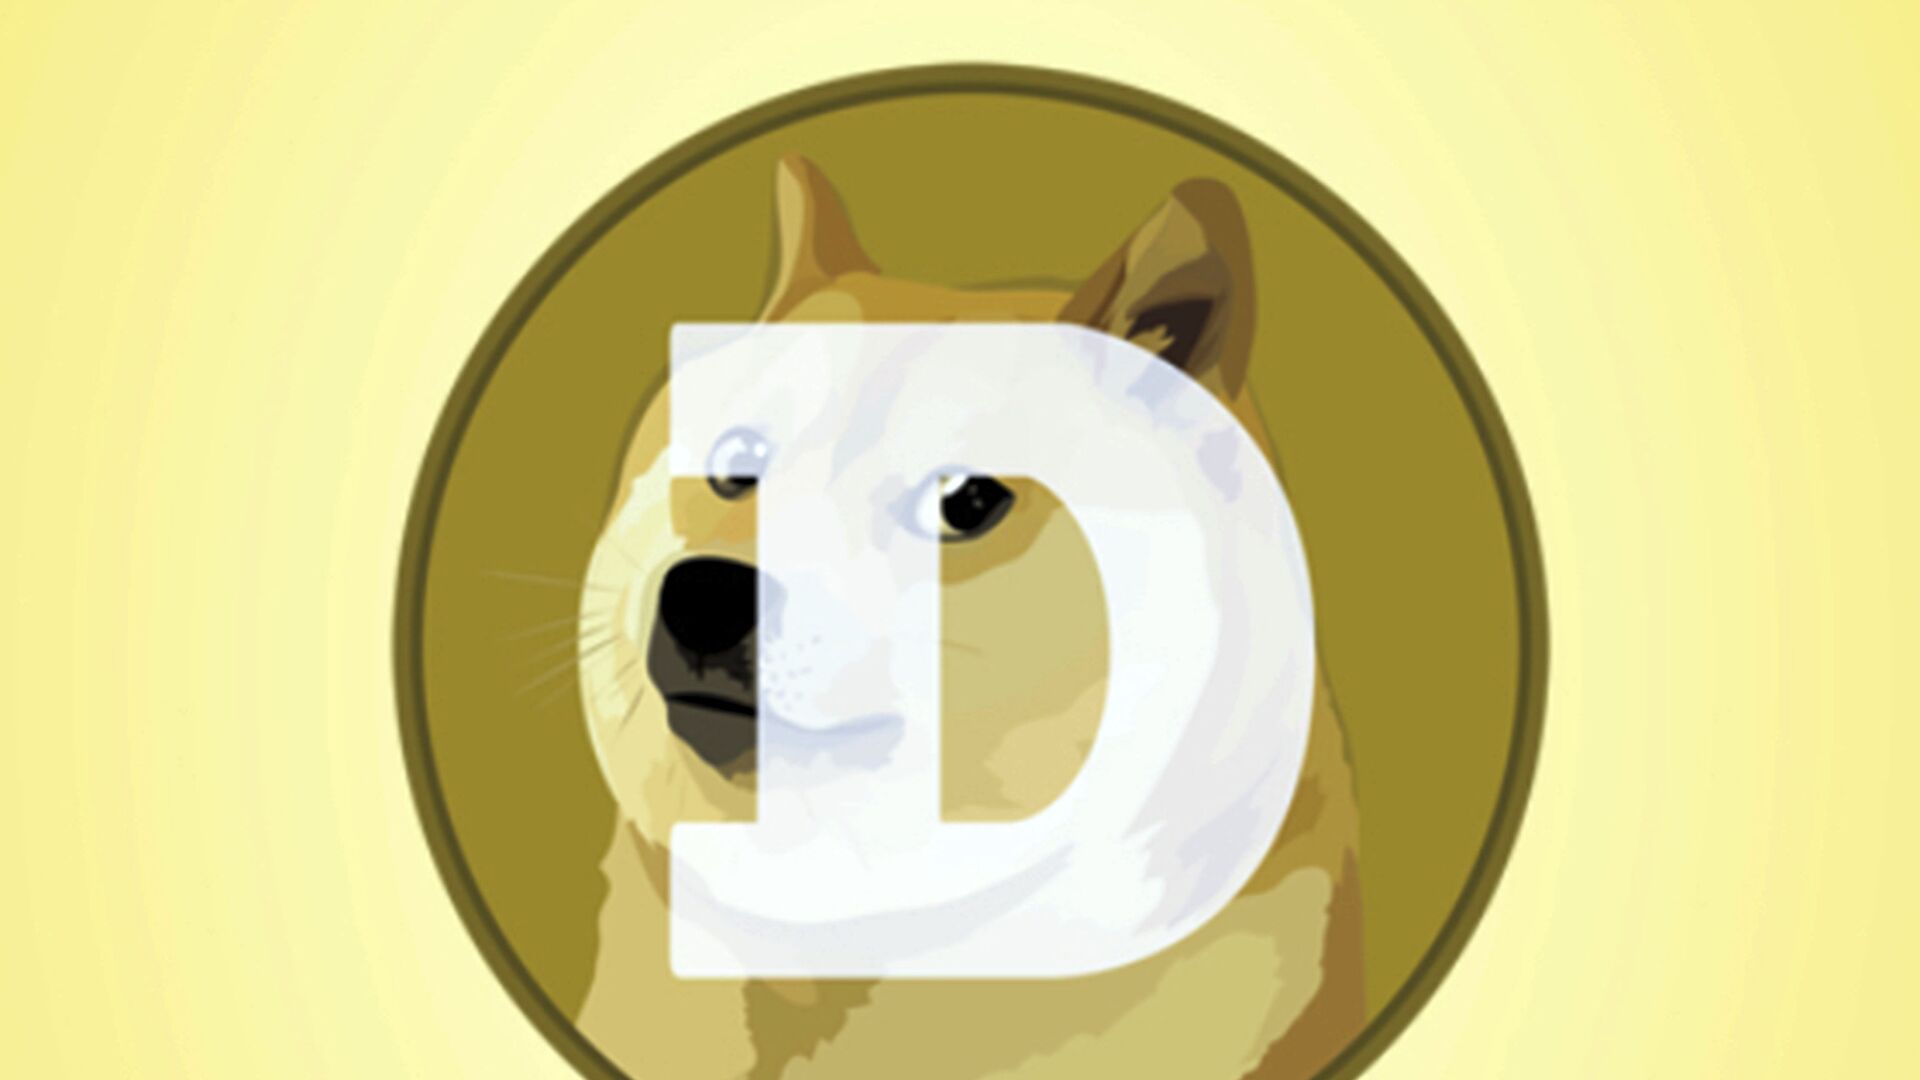 This mobile phone app screen shot shows the logo for Dogecoin, in New York, Tuesday, April 20, 2021 - Sputnik International, 1920, 01.06.2021